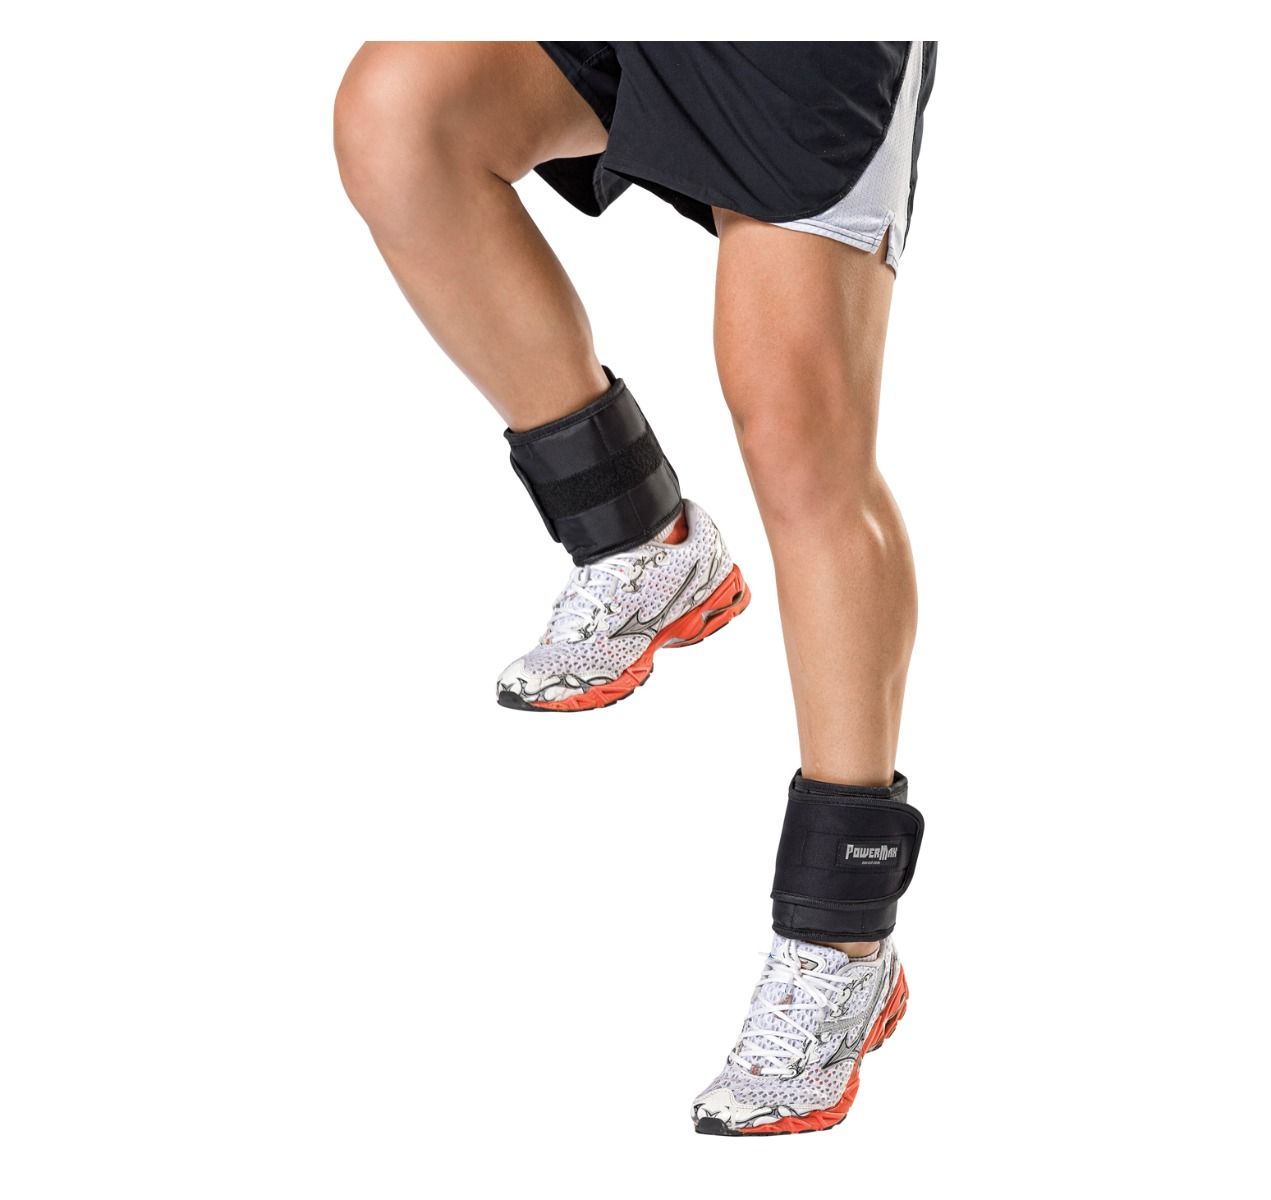 ADJUSTABLE ANKLE WEIGHTS